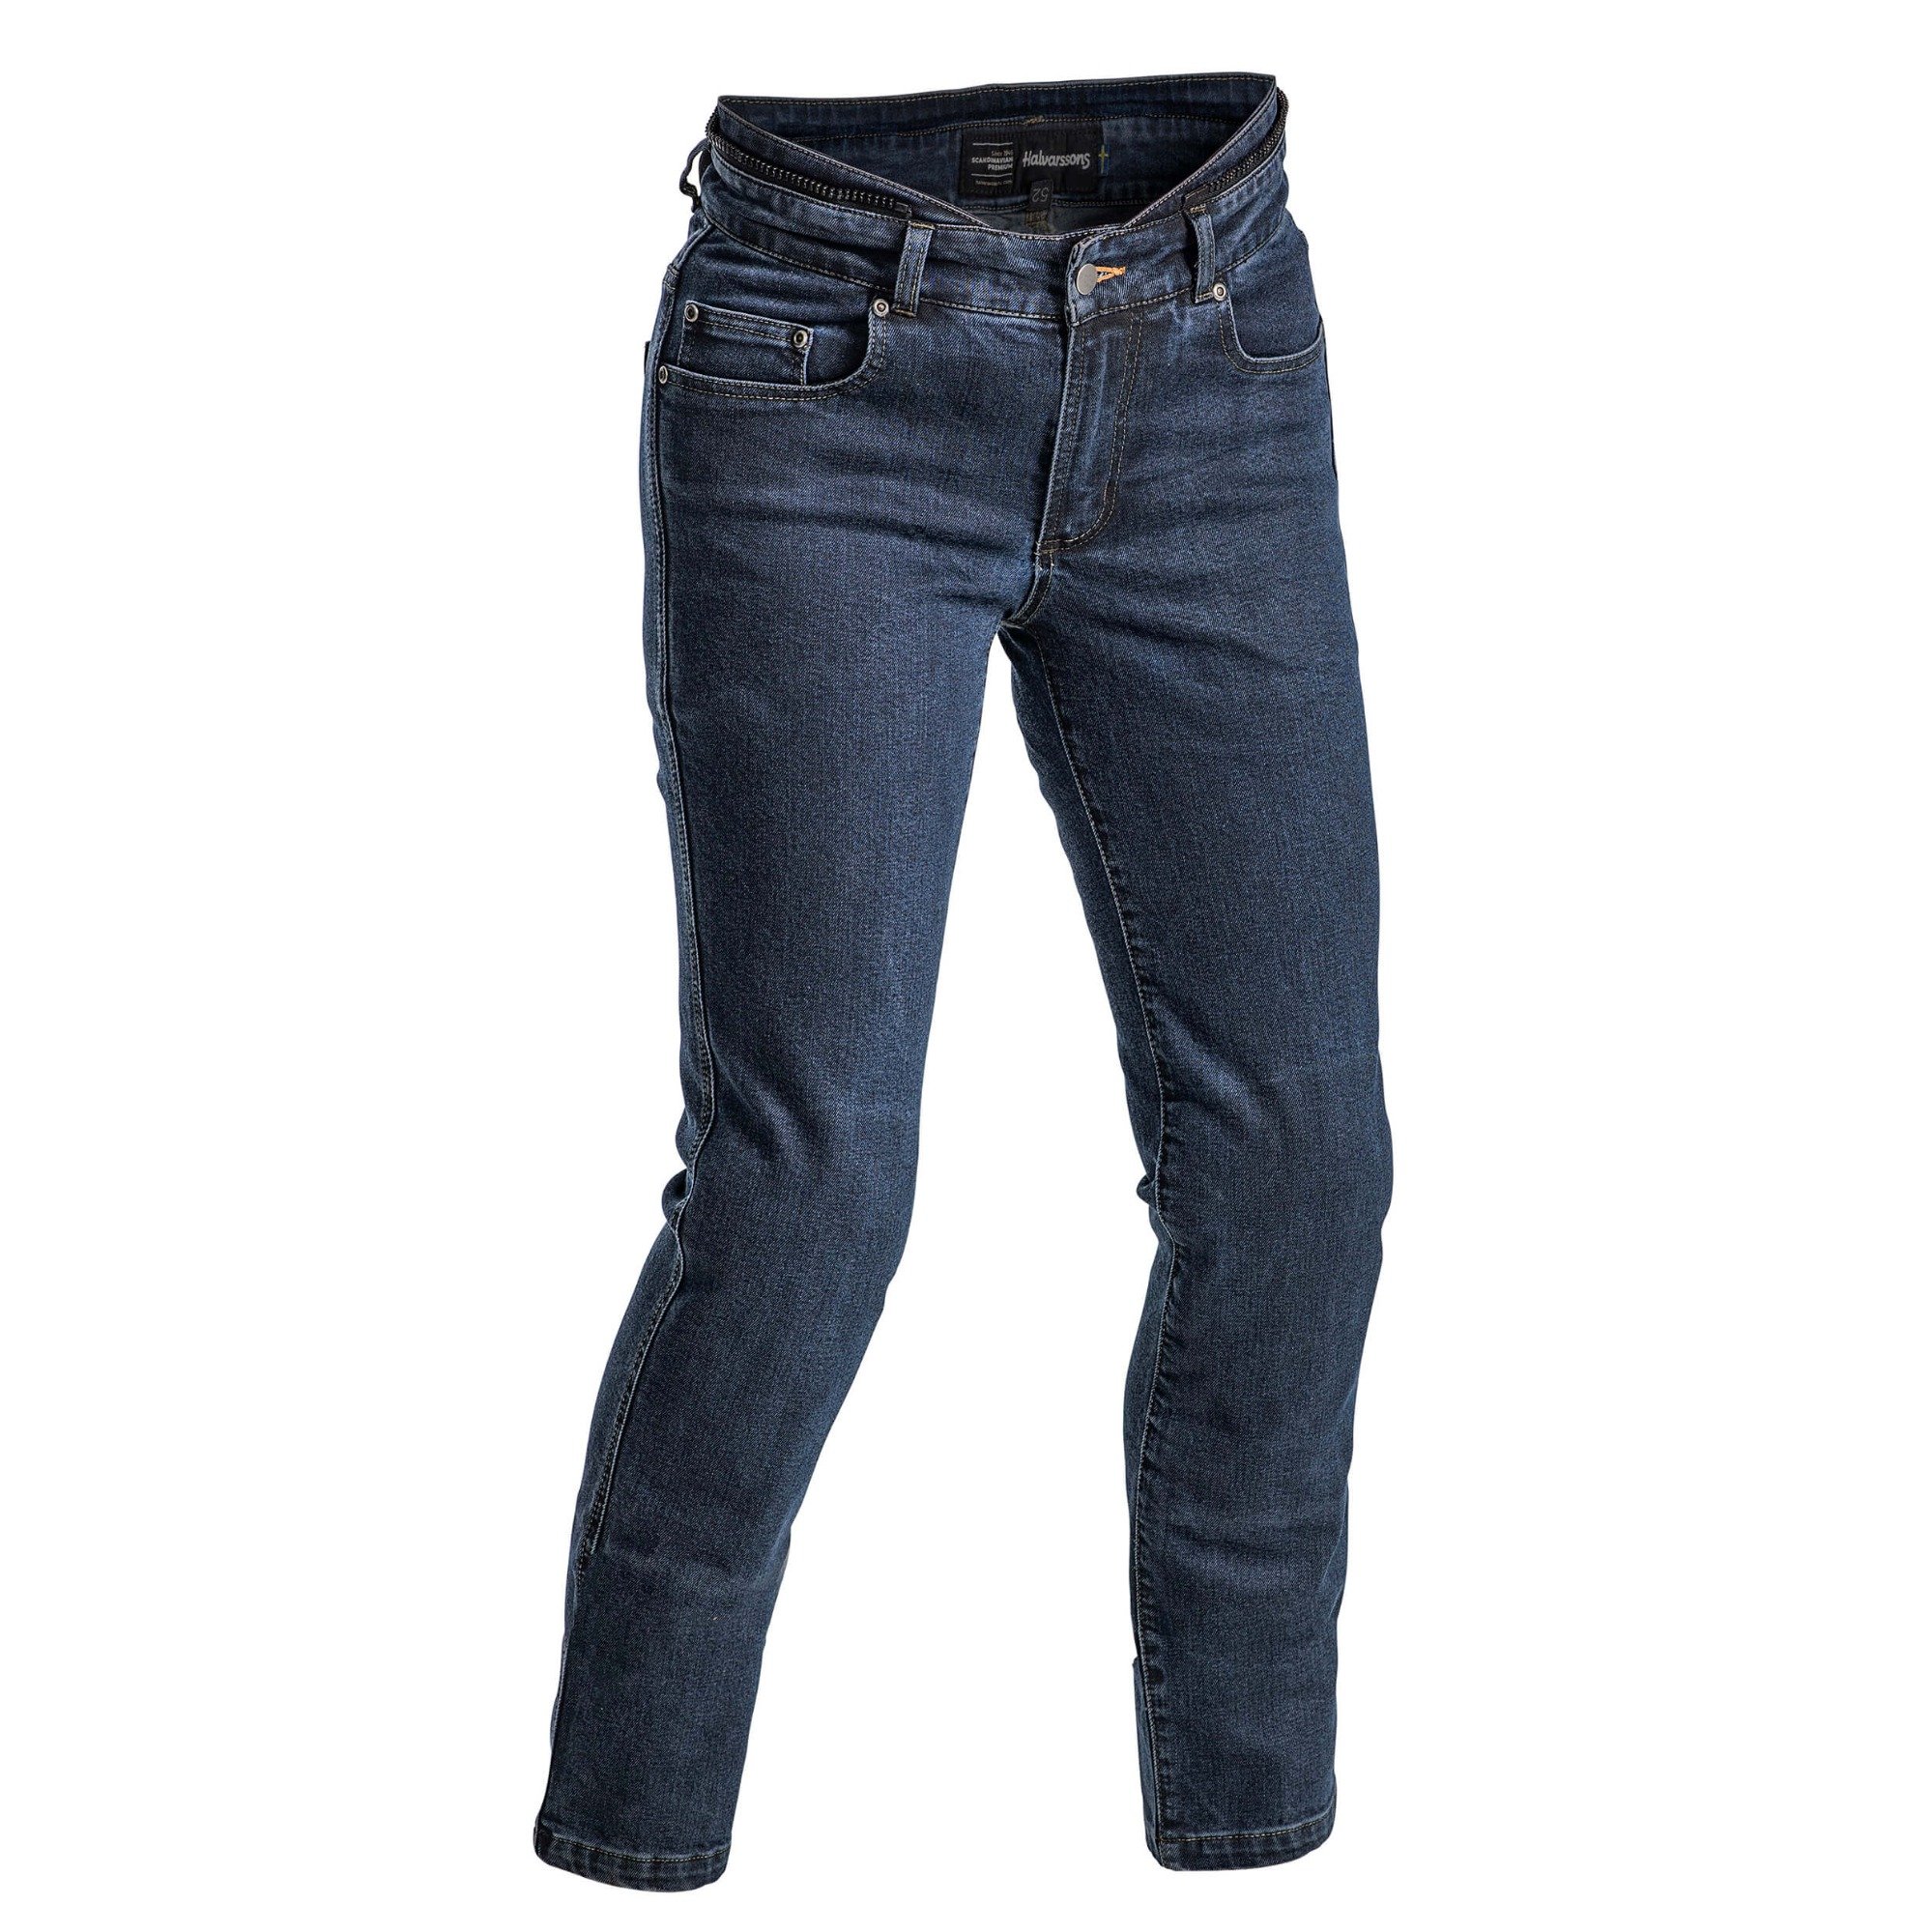 Image of Halvarssons Jeans Rogen Woman Blue Size 42 ID 6438235239126